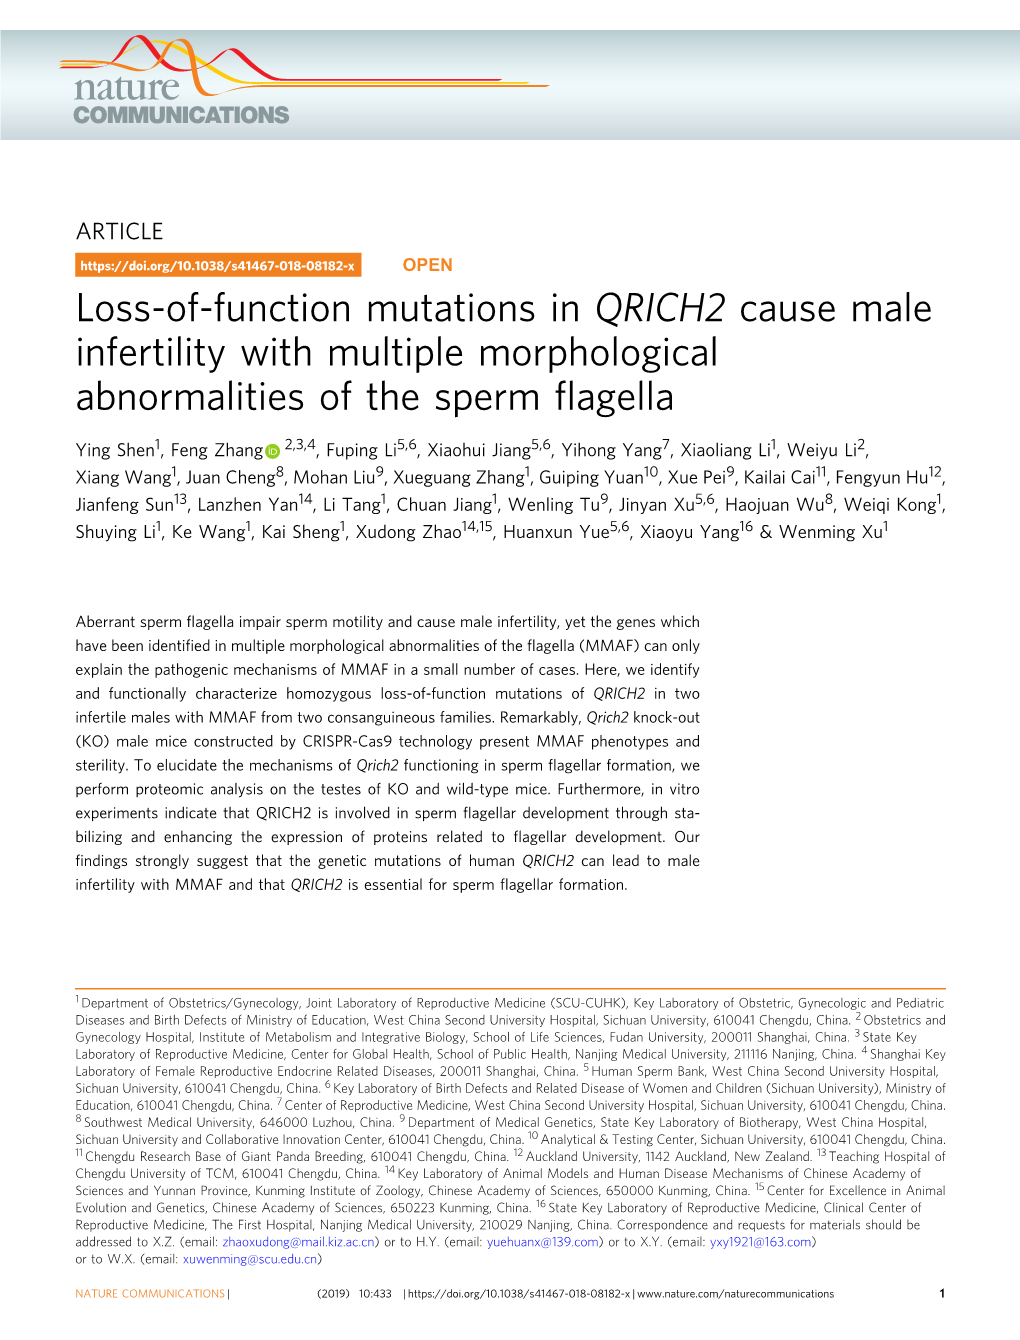 Loss-Of-Function Mutations in QRICH2 Cause Male Infertility with Multiple Morphological Abnormalities of the Sperm ﬂagella